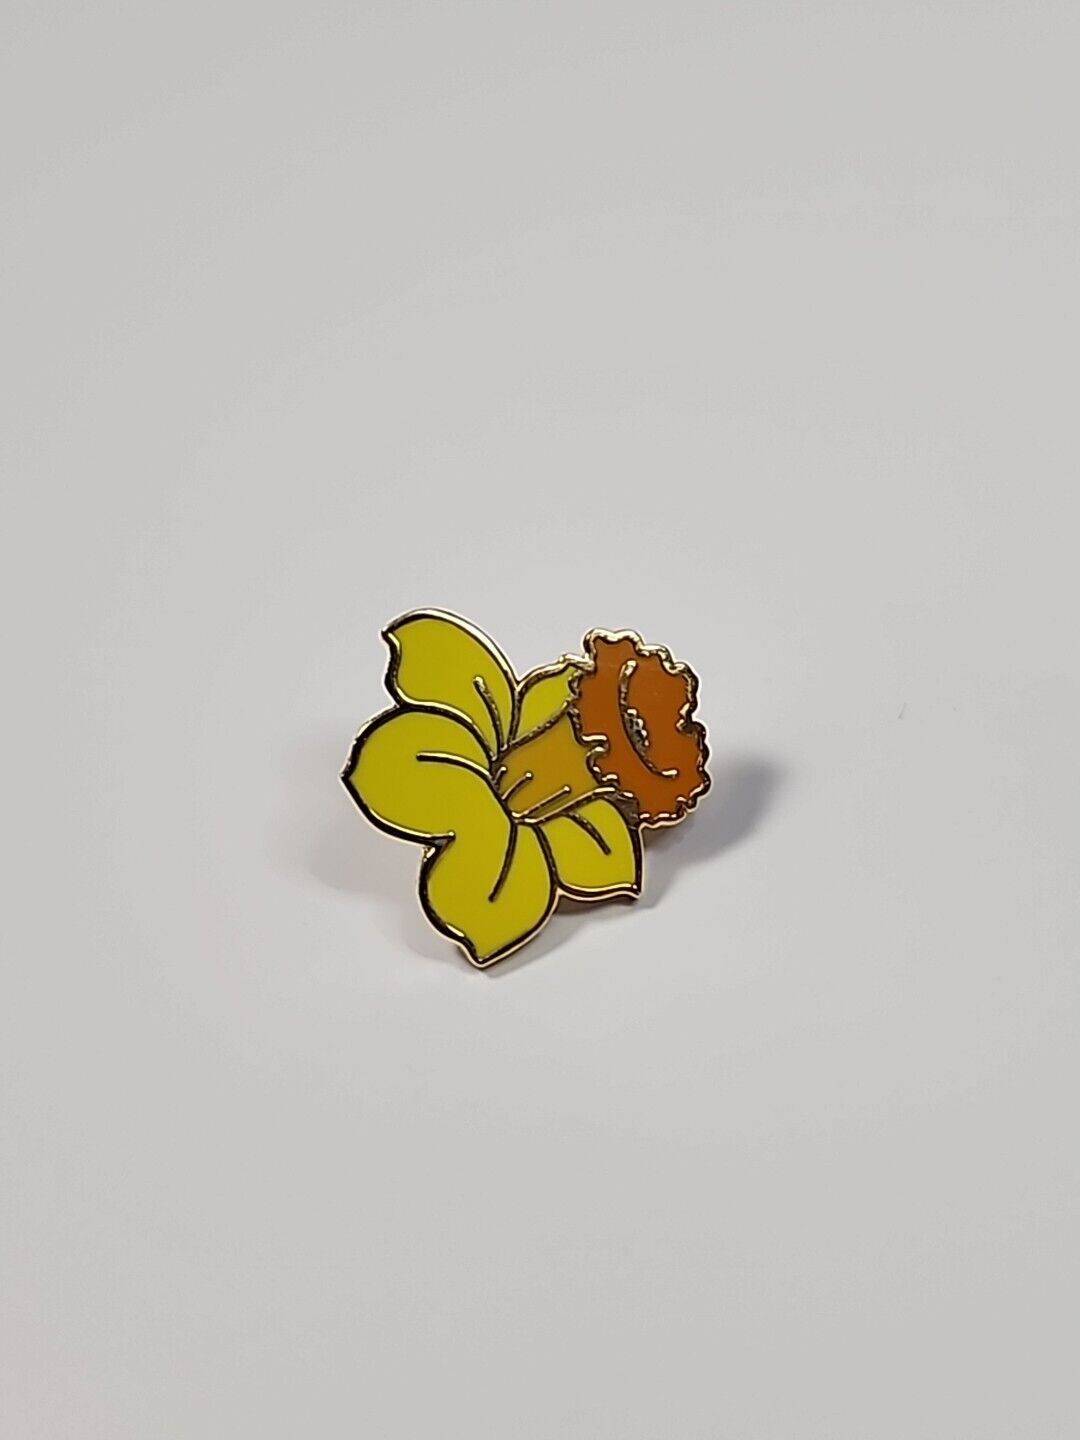 Daffodil Lapel Pin Spring Flower Yellow with Orange Center